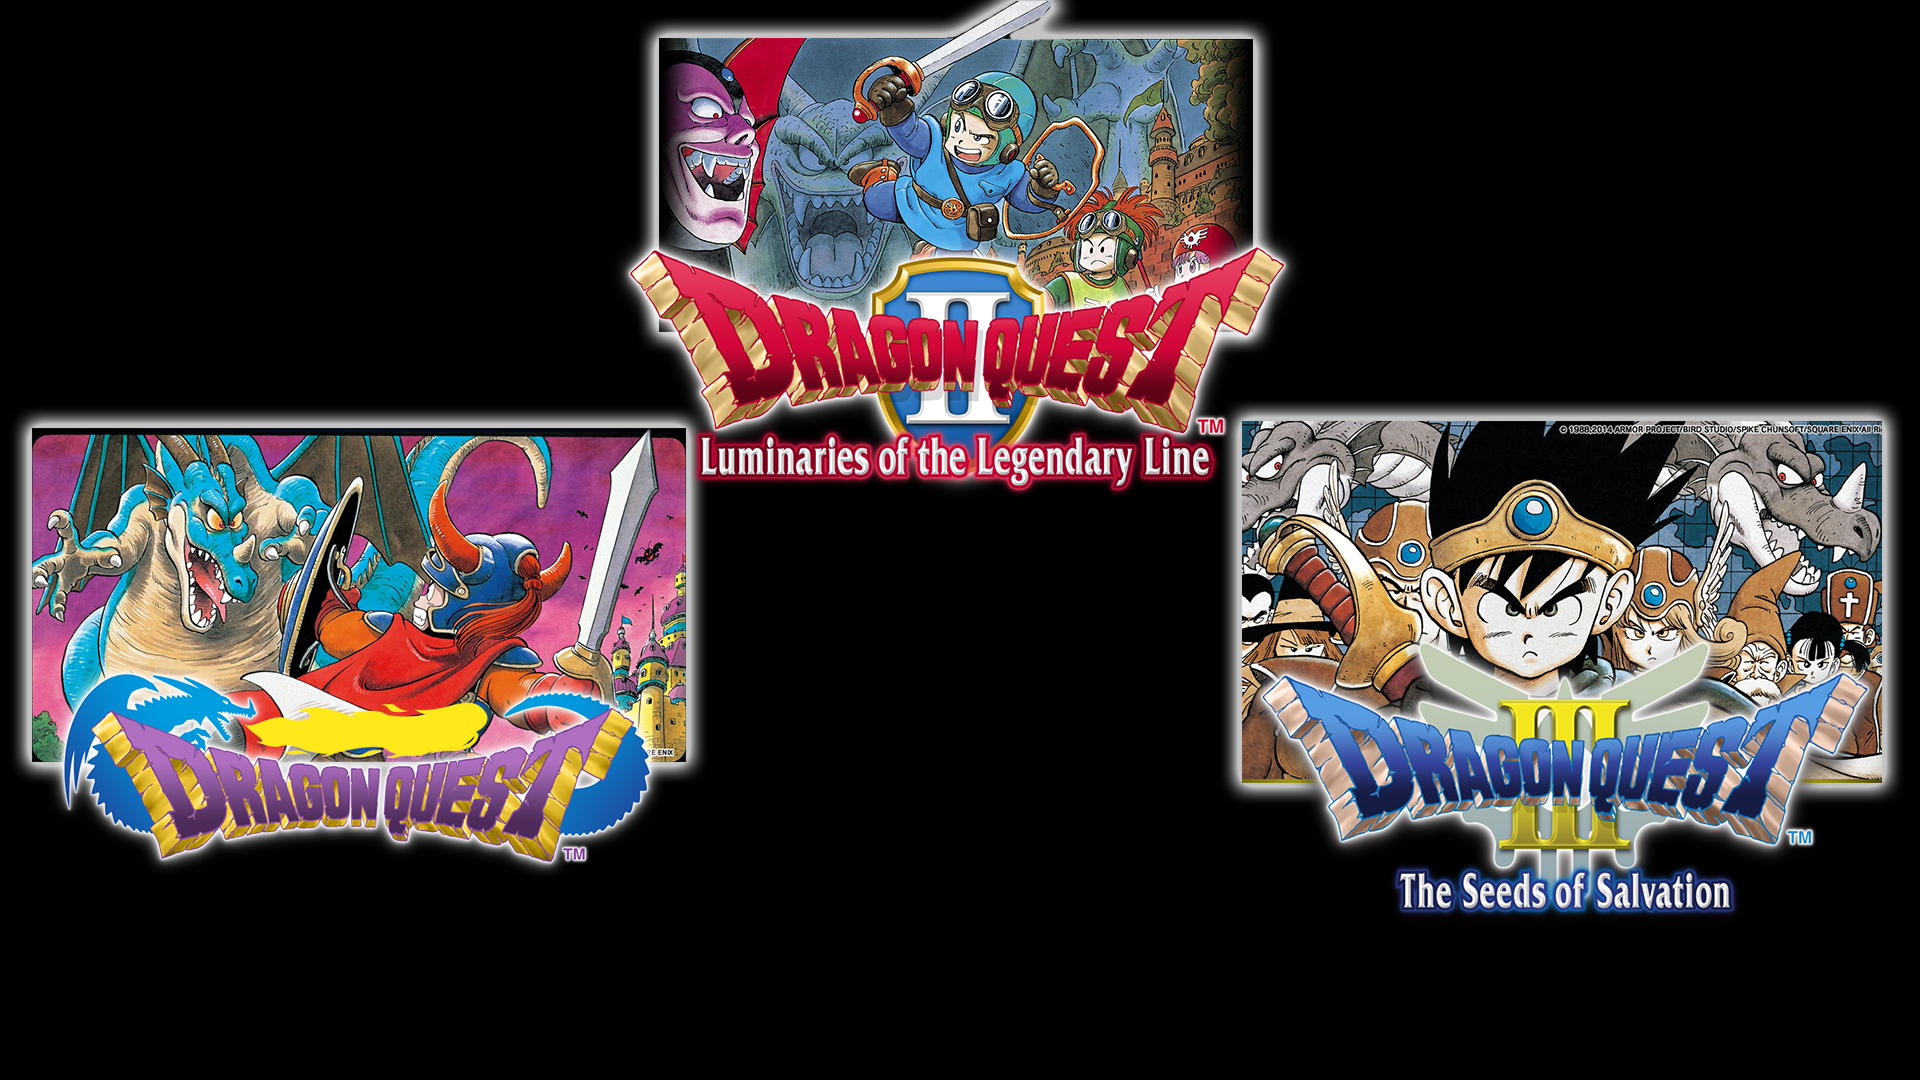 Dragon Quest 1 2 3(I+II+III) Collection (Switch) English Sub / English Cover